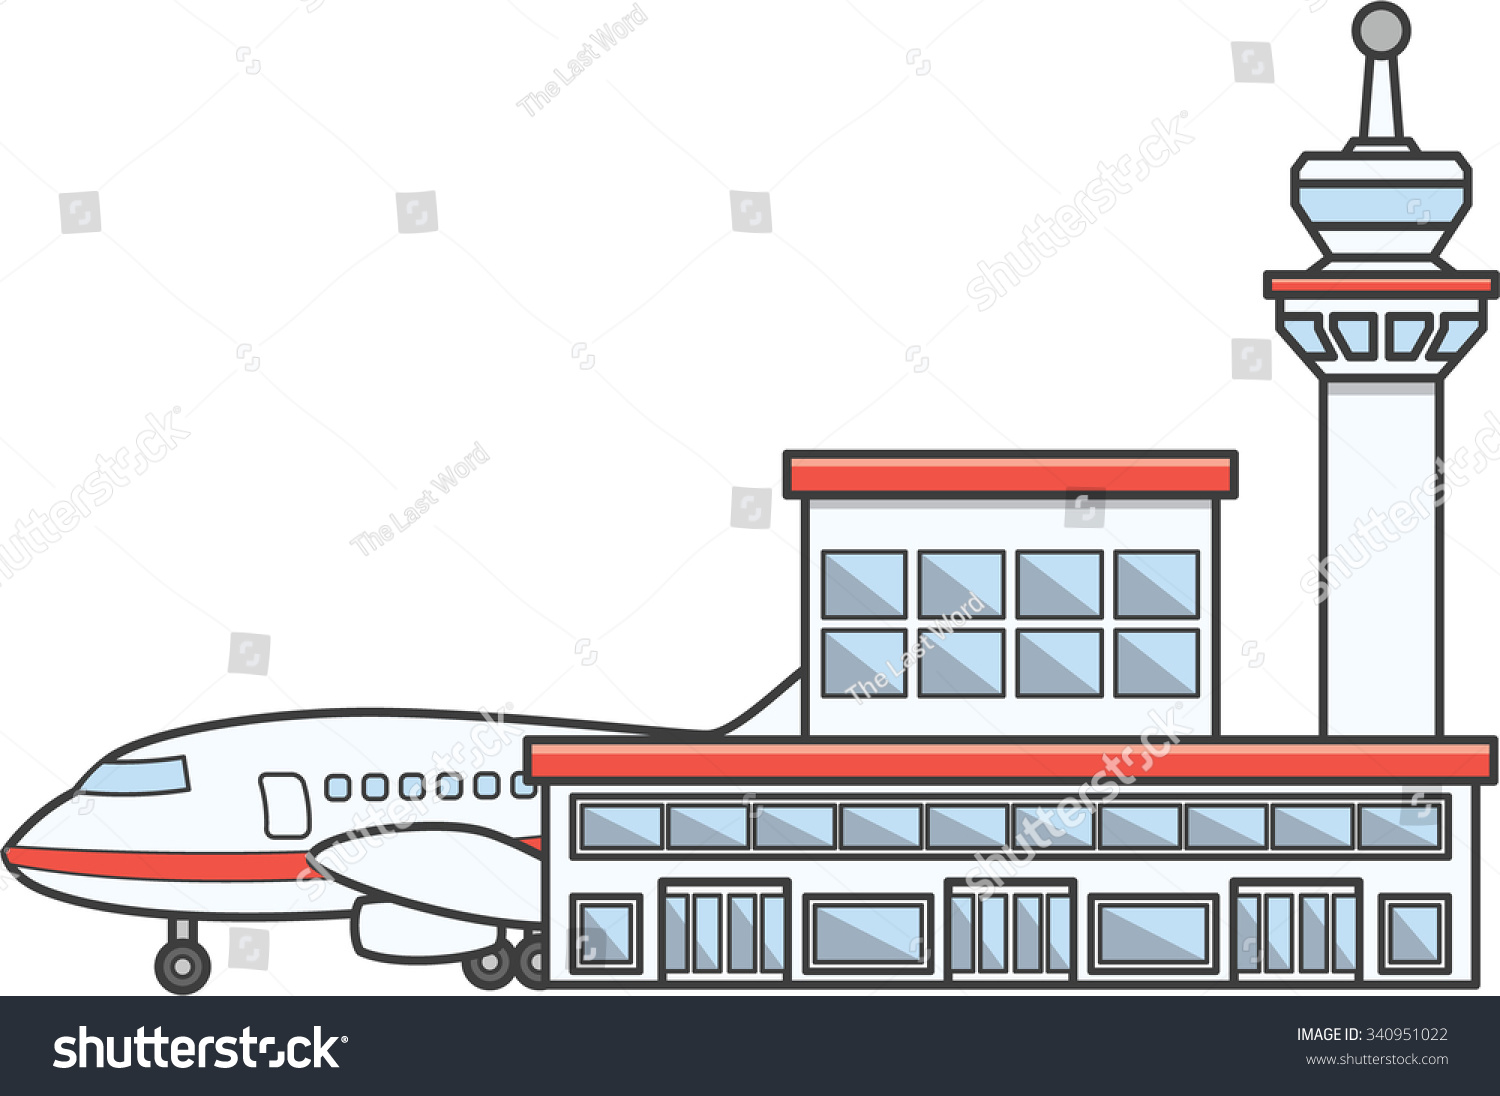 clipart airport free - photo #34